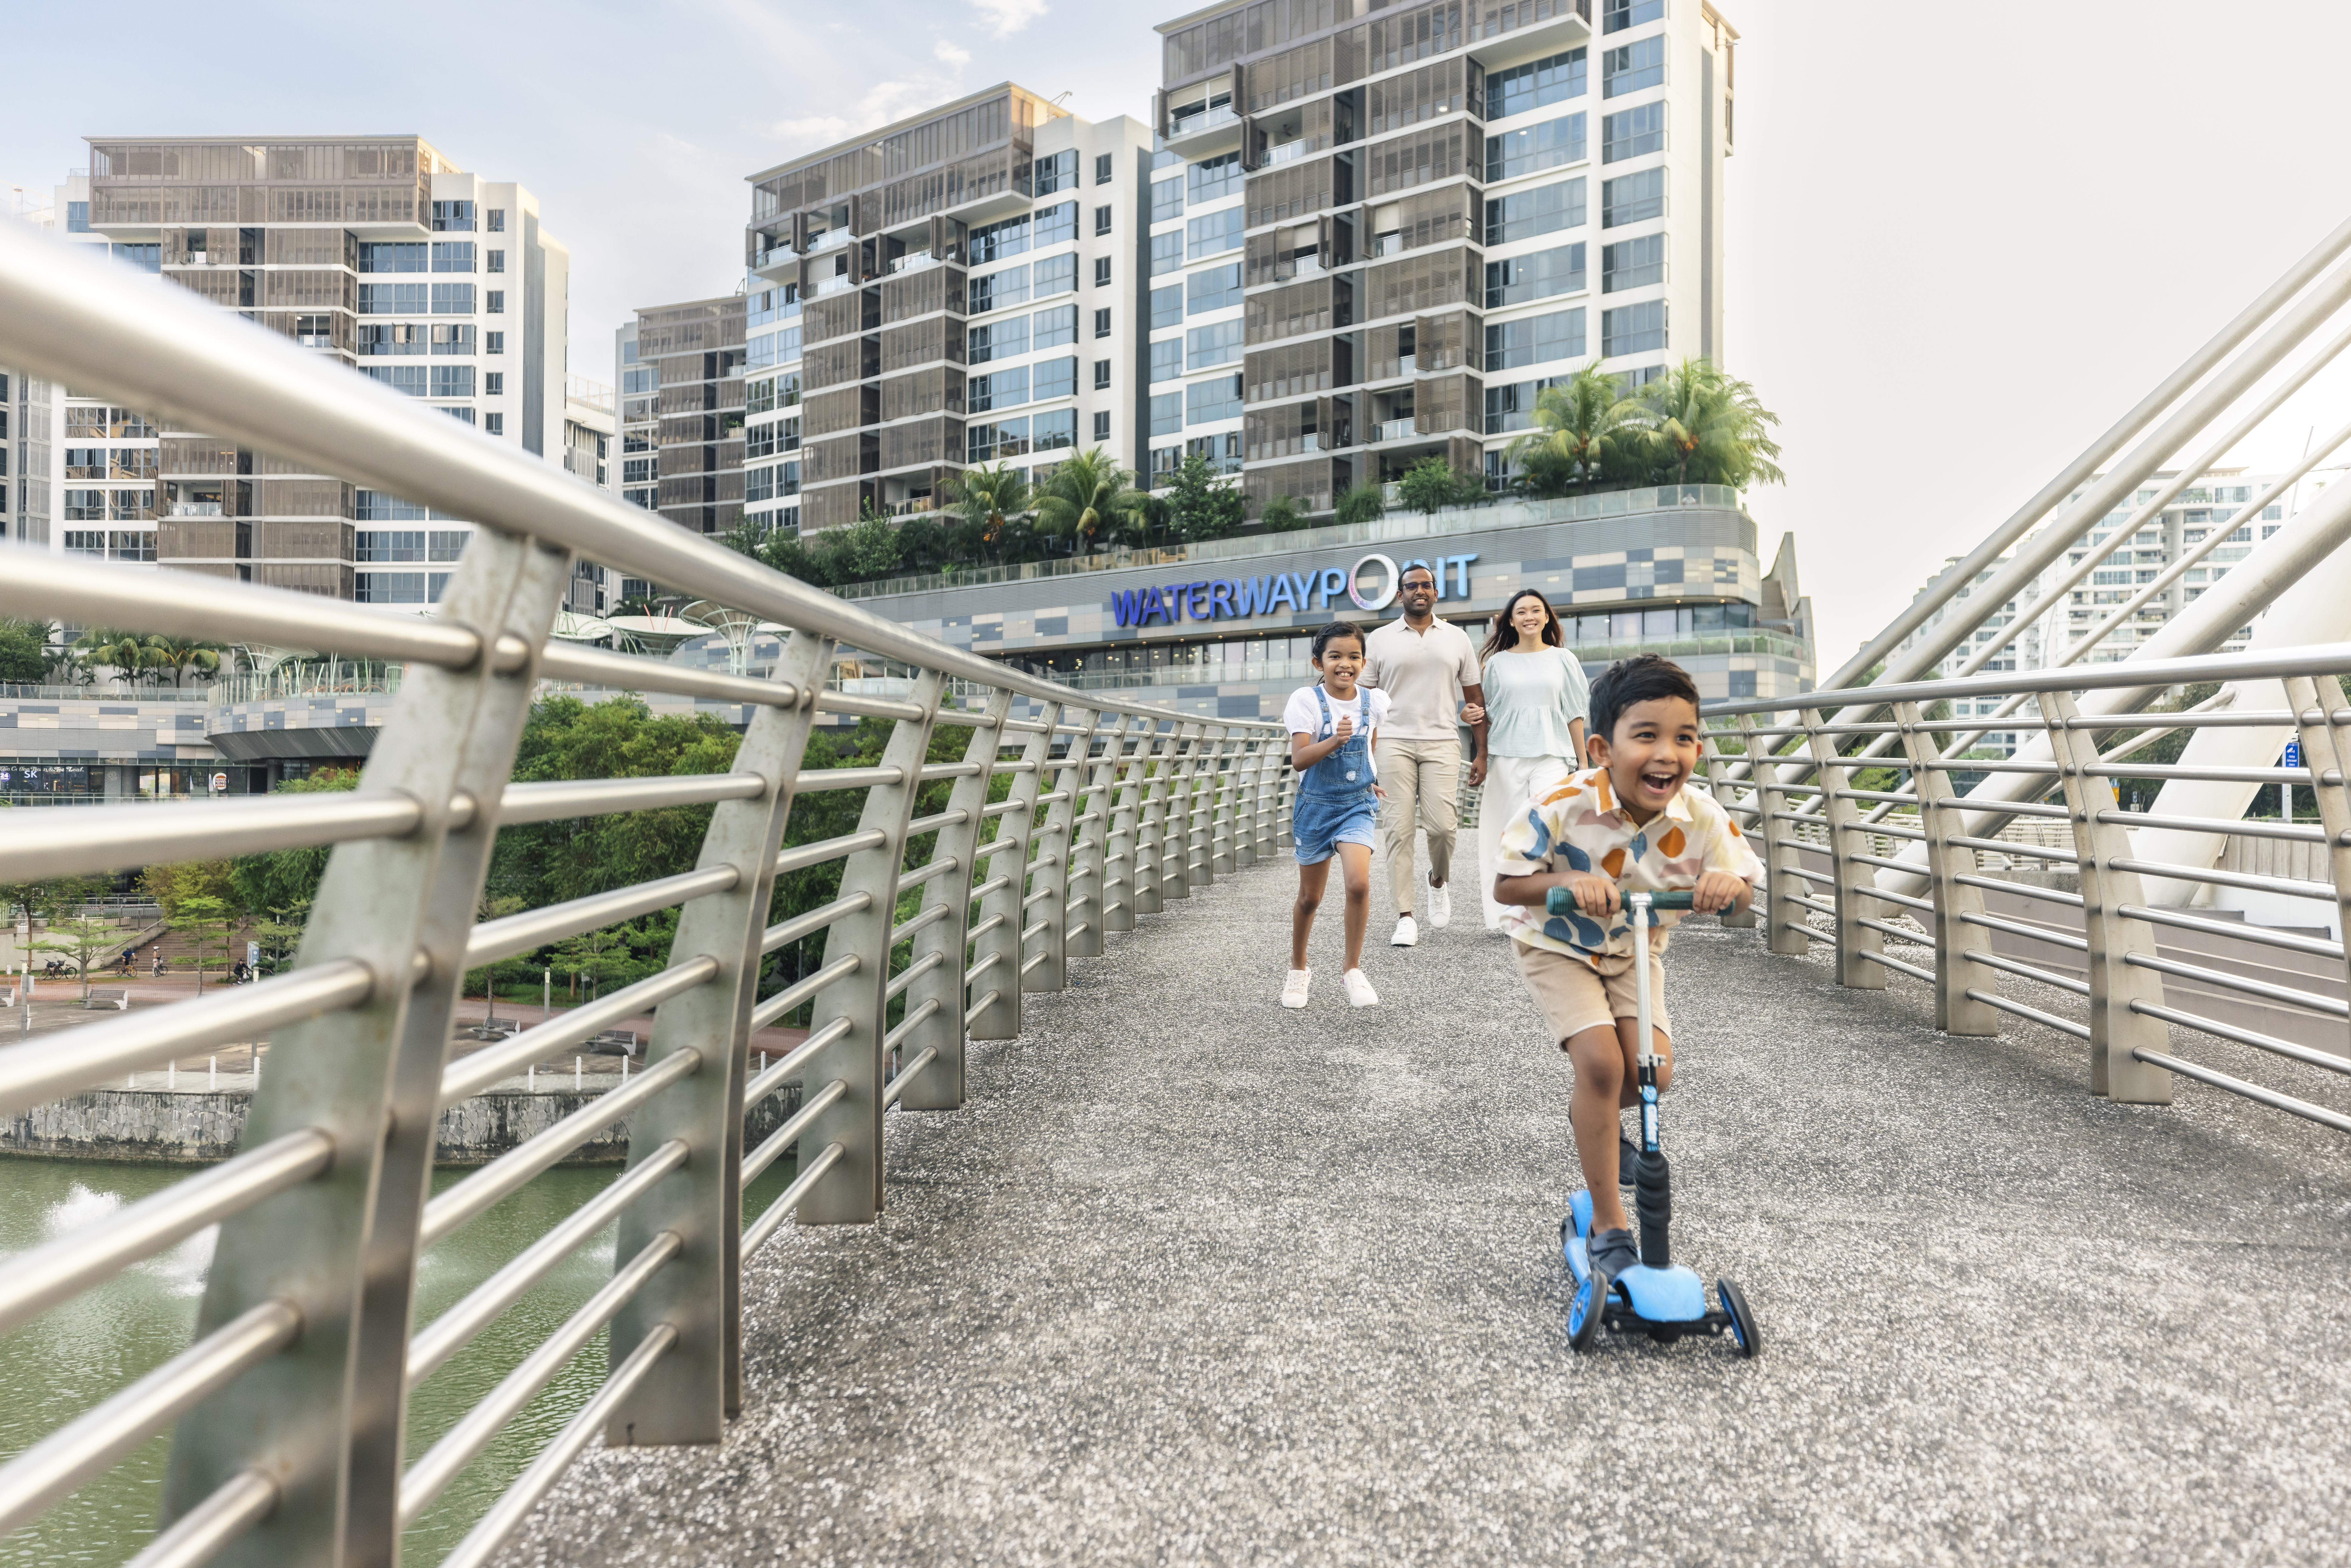 Frasers Property Singapore commits to deliver value to the community